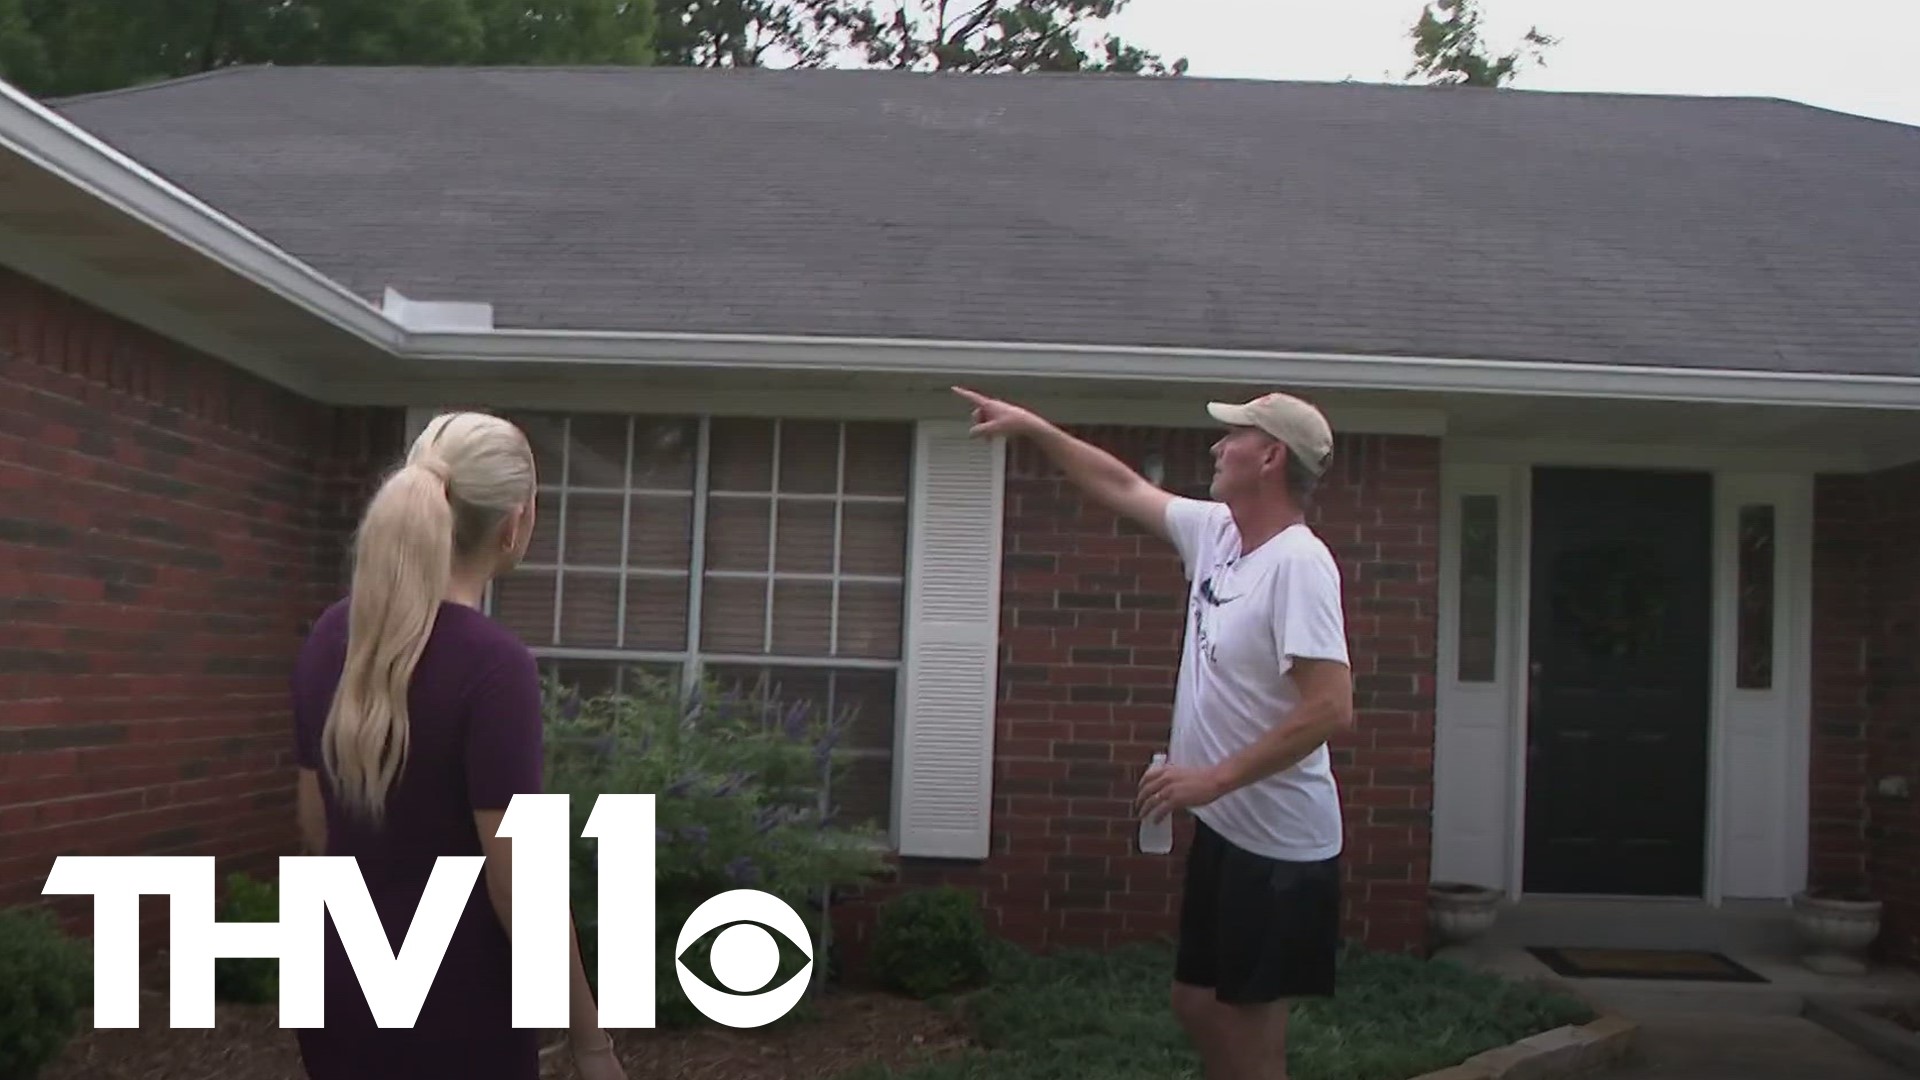 Hail storms in Arkansas just keep coming, on top of the long-lasting tornado damage. Experts share the answers to who you should call first if you experience damage.